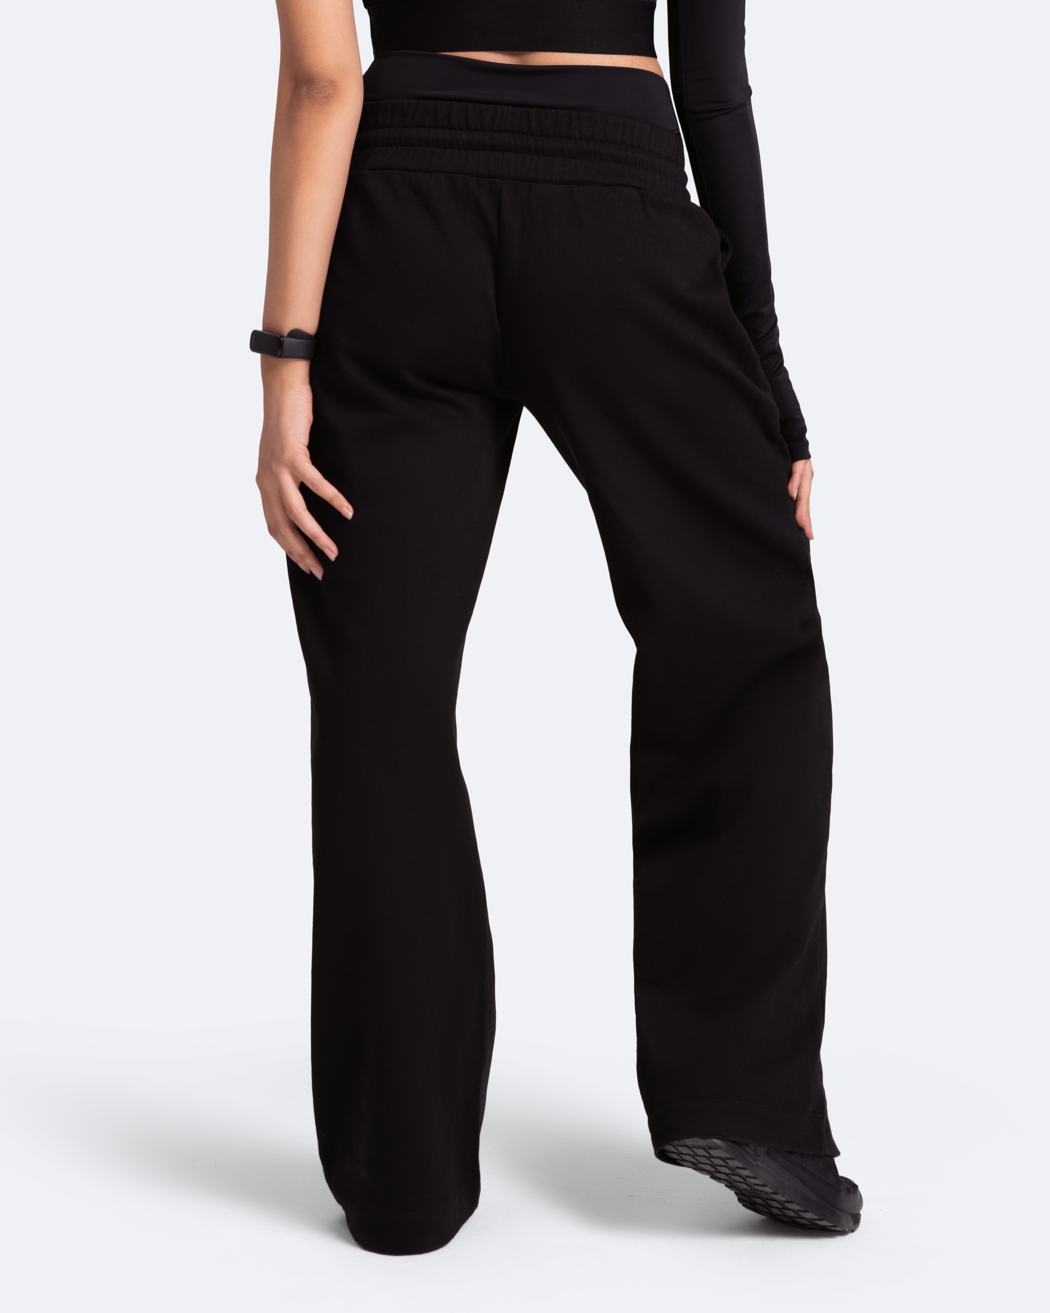 BCG leisure pants with wide waist for tummy control women's size